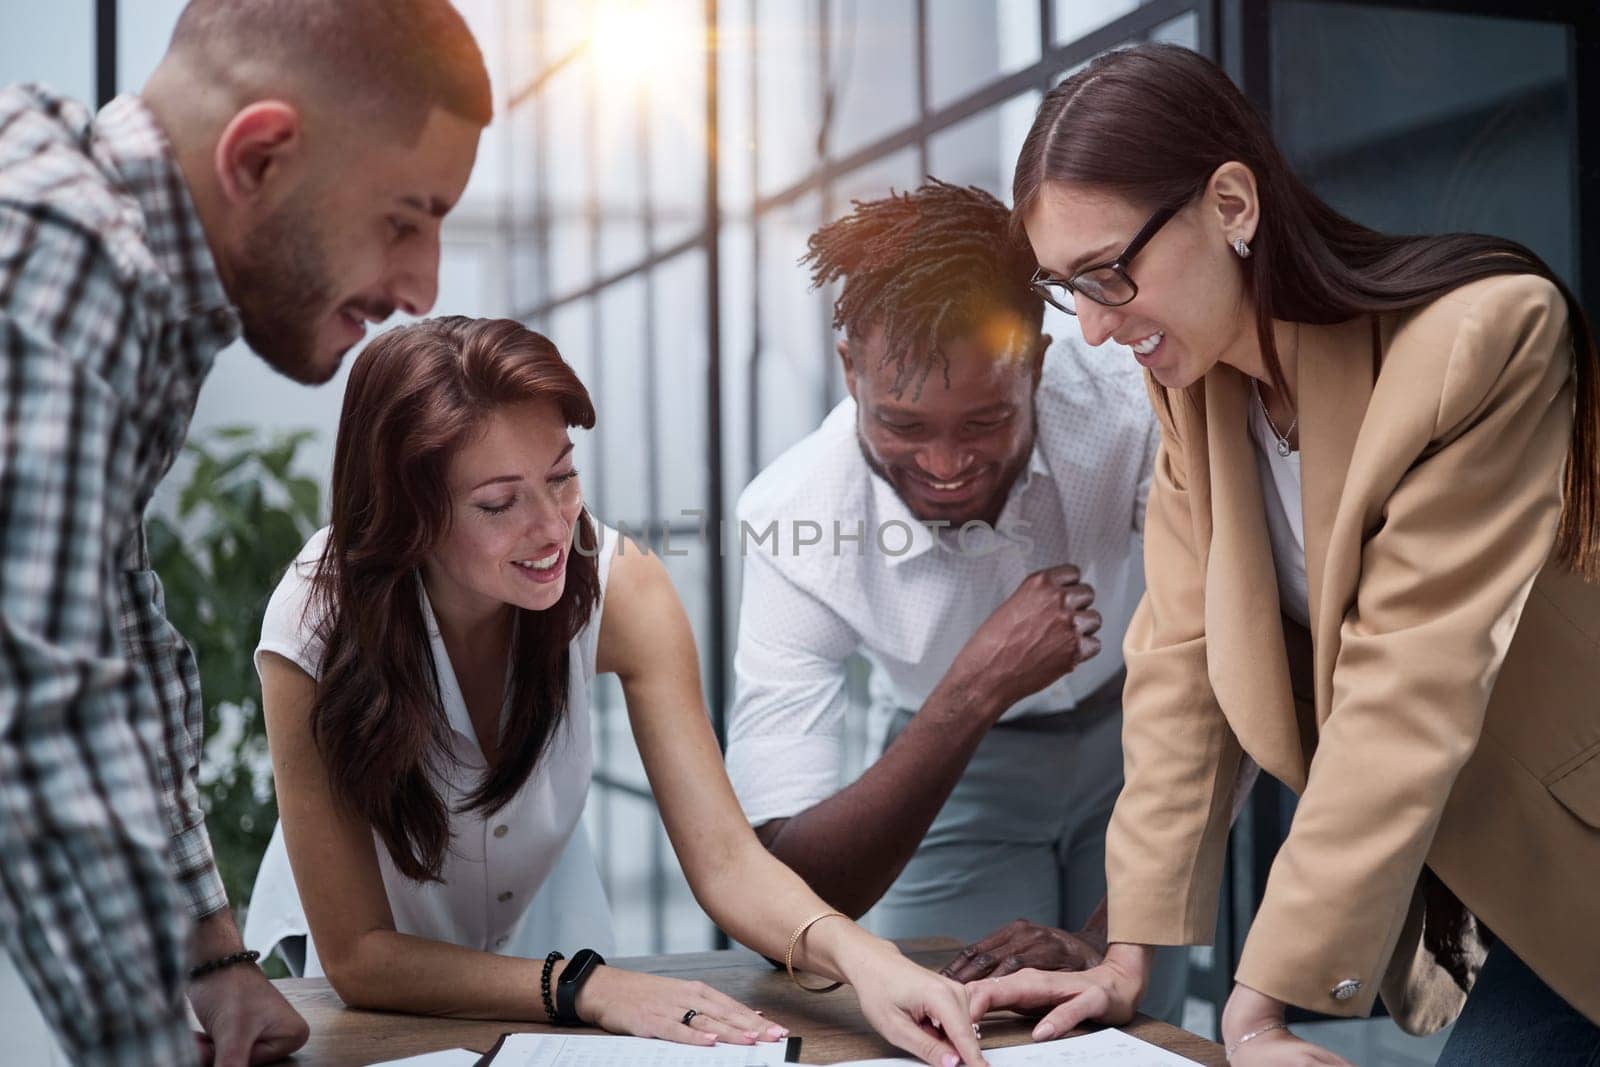 Ambitious smart employee speaks in a meeting and shares her opinion on a creative idea in a group briefing